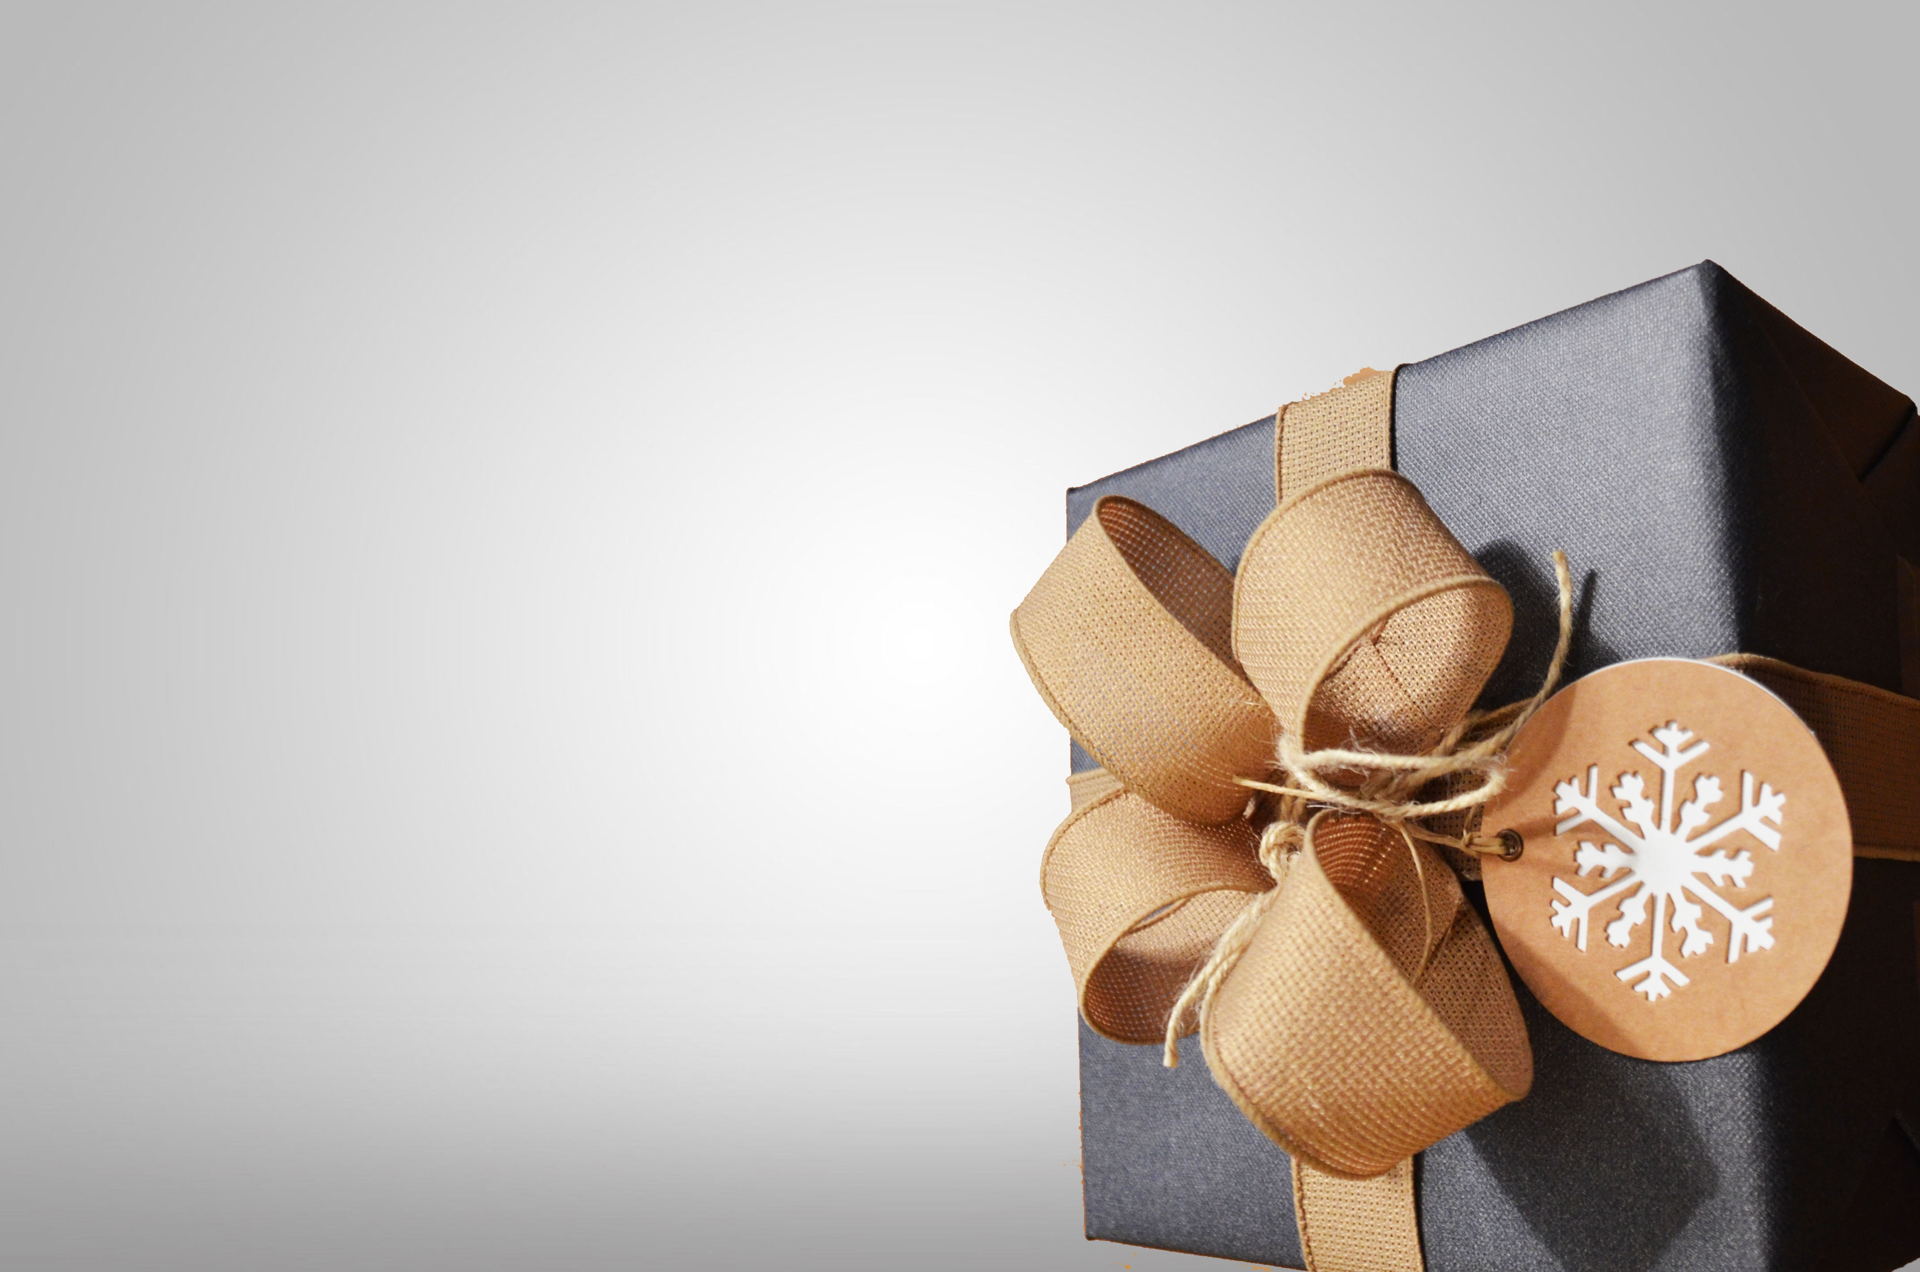 How to Wrap a Gift Perfectly Every Time, According to Experts